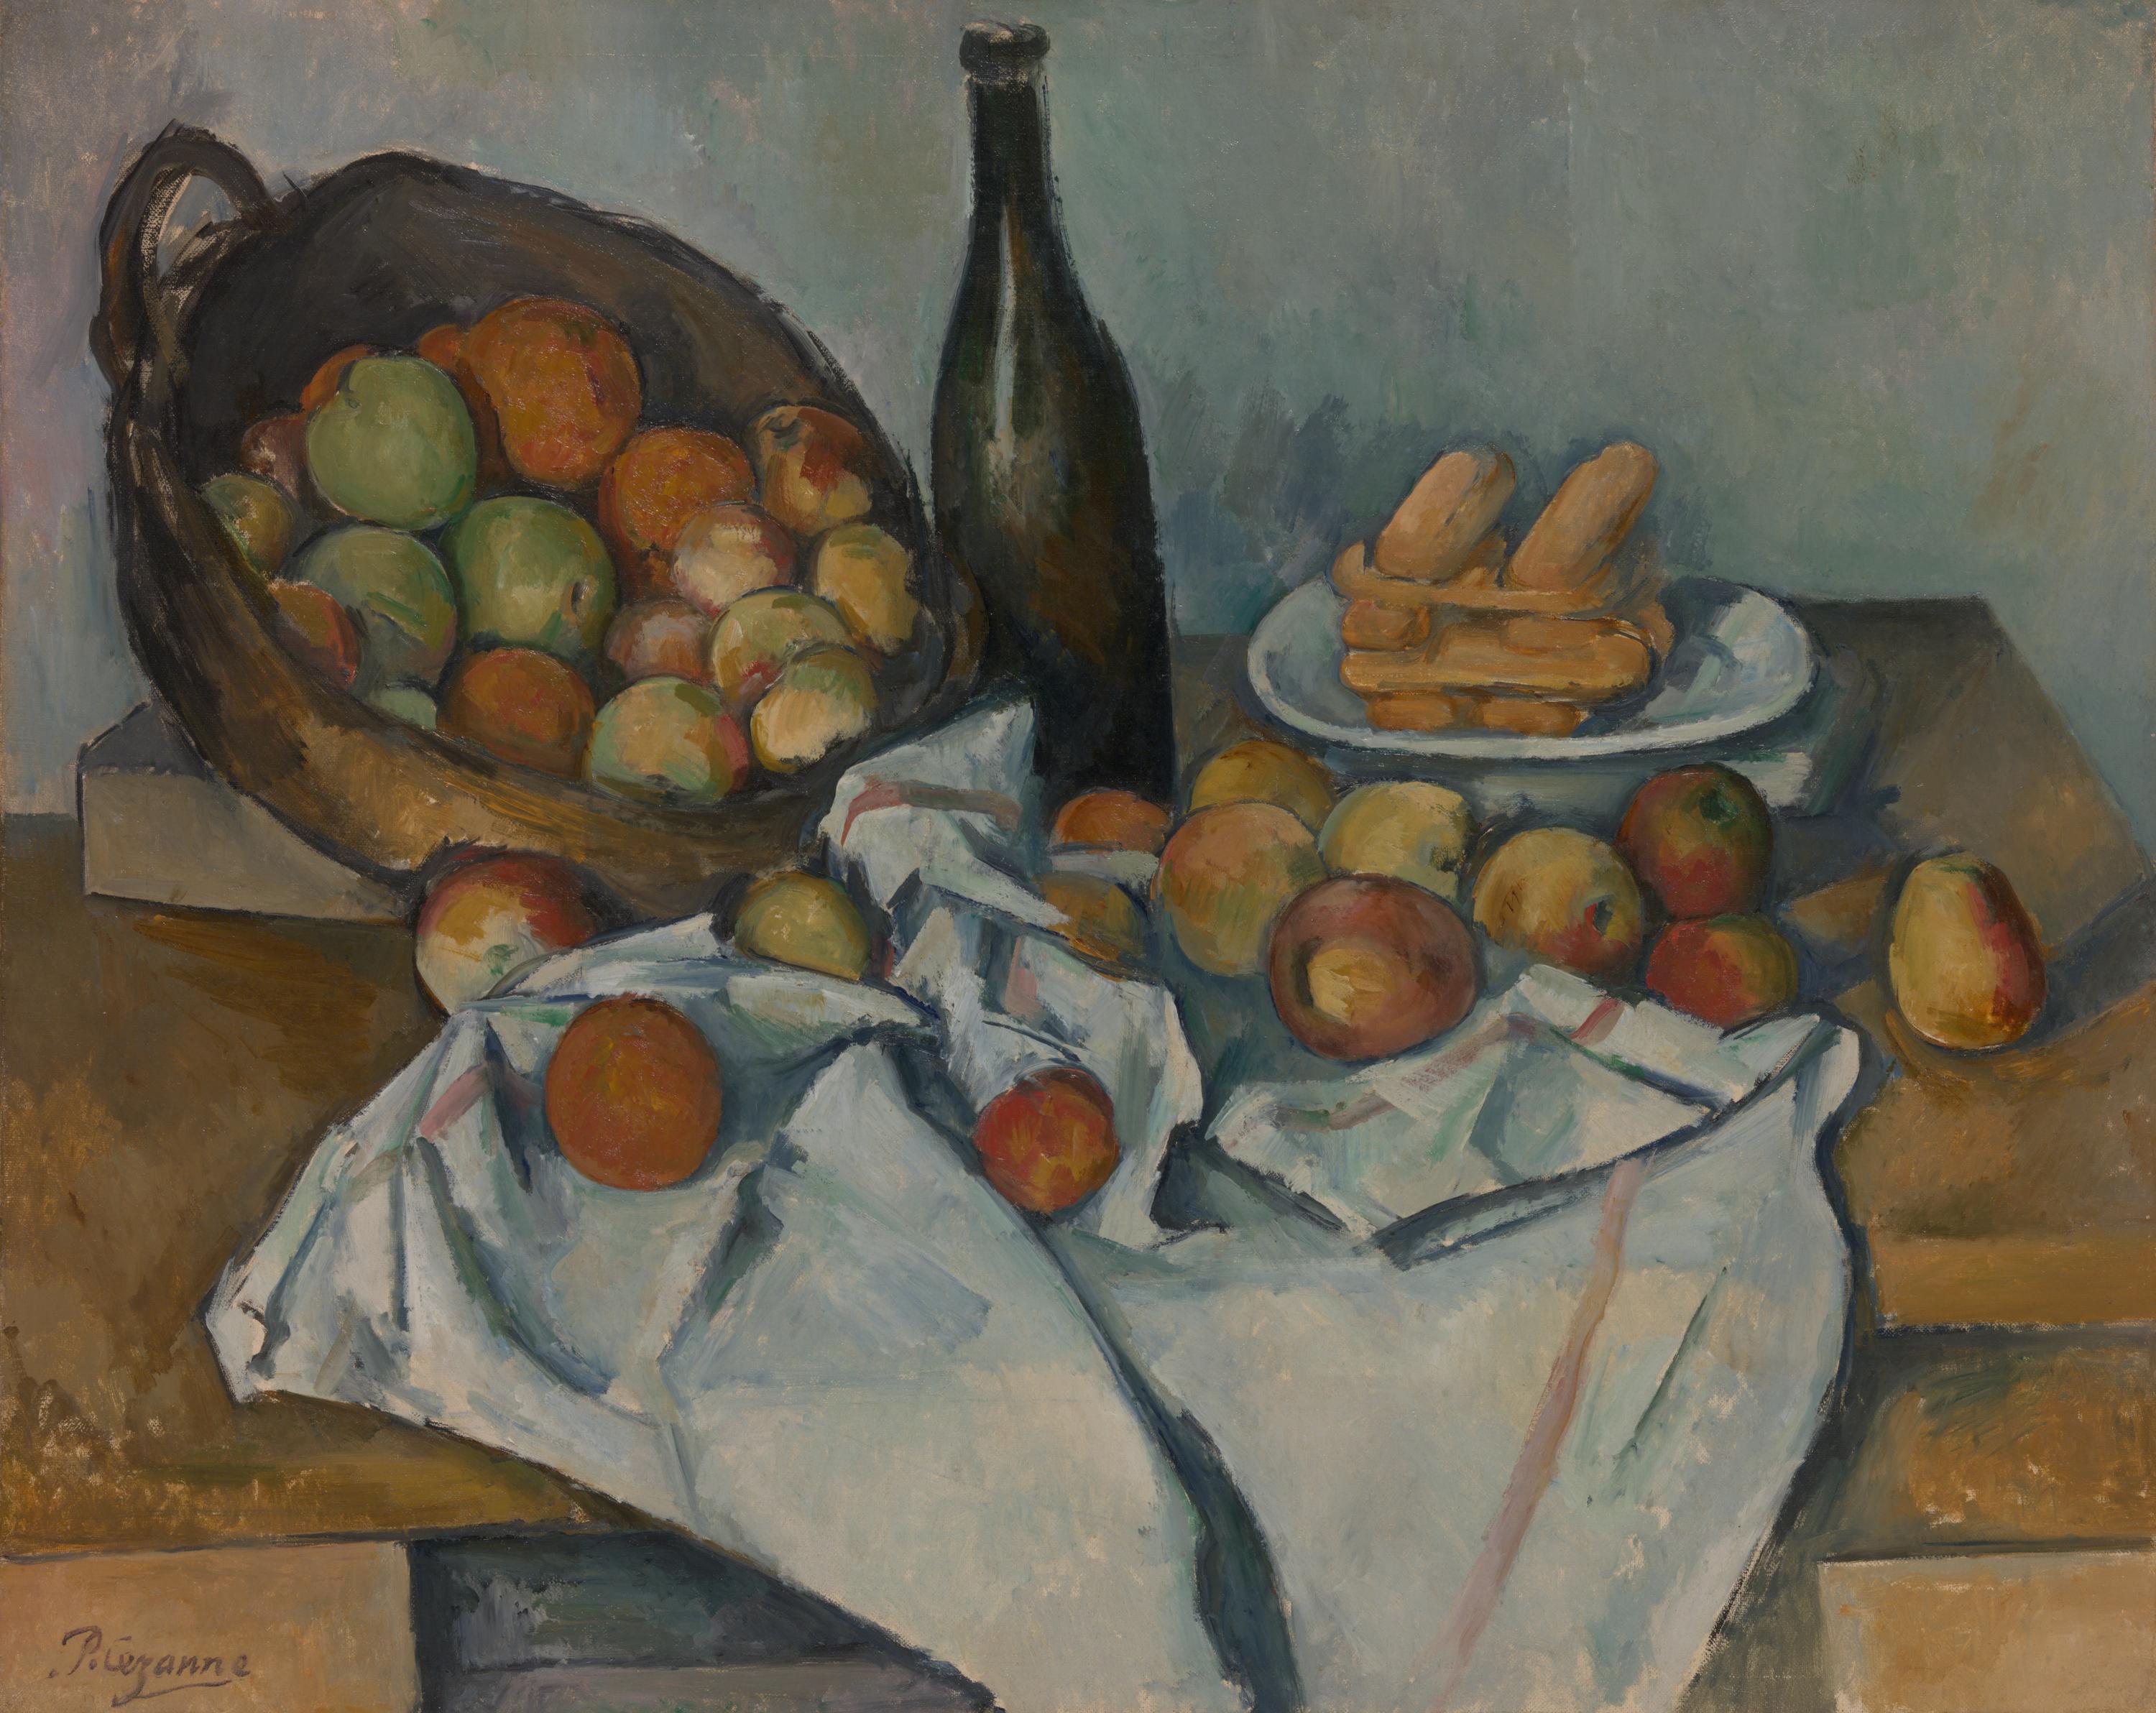 Cezanne at The Tate